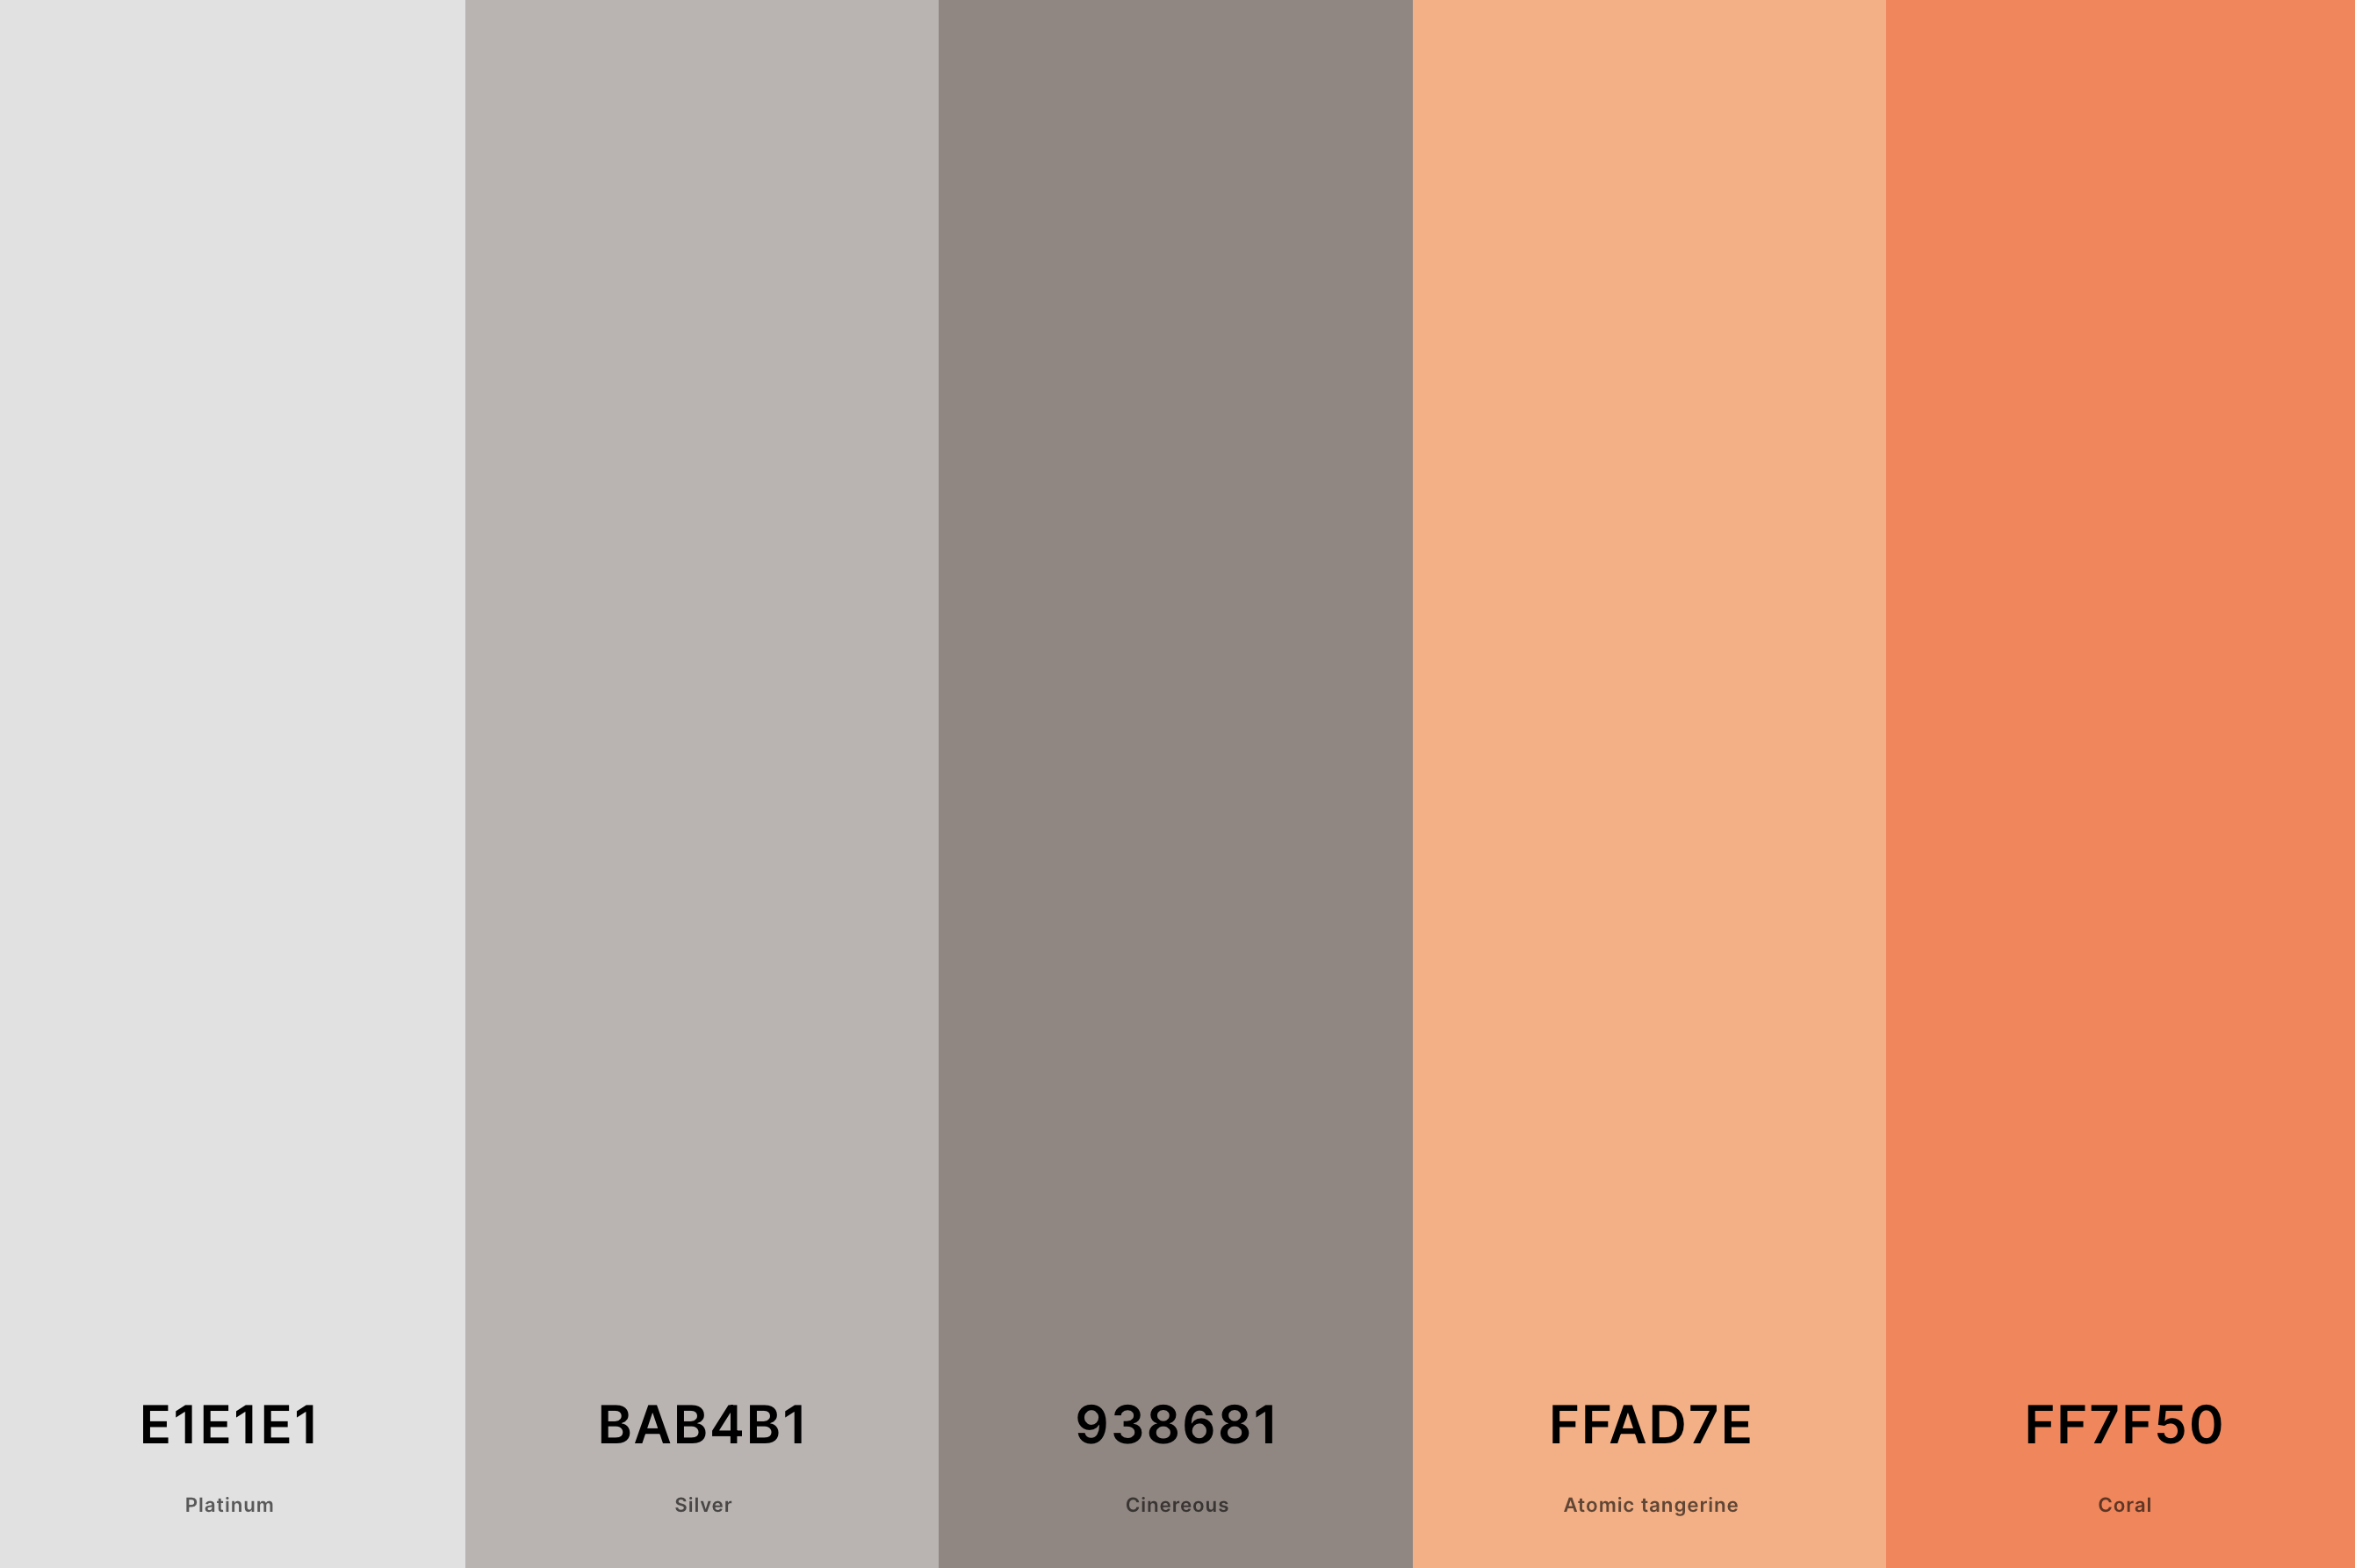 9. Coral And Grey Color Palette Color Palette with Platinum (Hex #E1E1E1) + Silver (Hex #BAB4B1) + Cinereous (Hex #938681) + Atomic Tangerine (Hex #FFAD7E) + Coral (Hex #FF7F50) Color Palette with Hex Codes